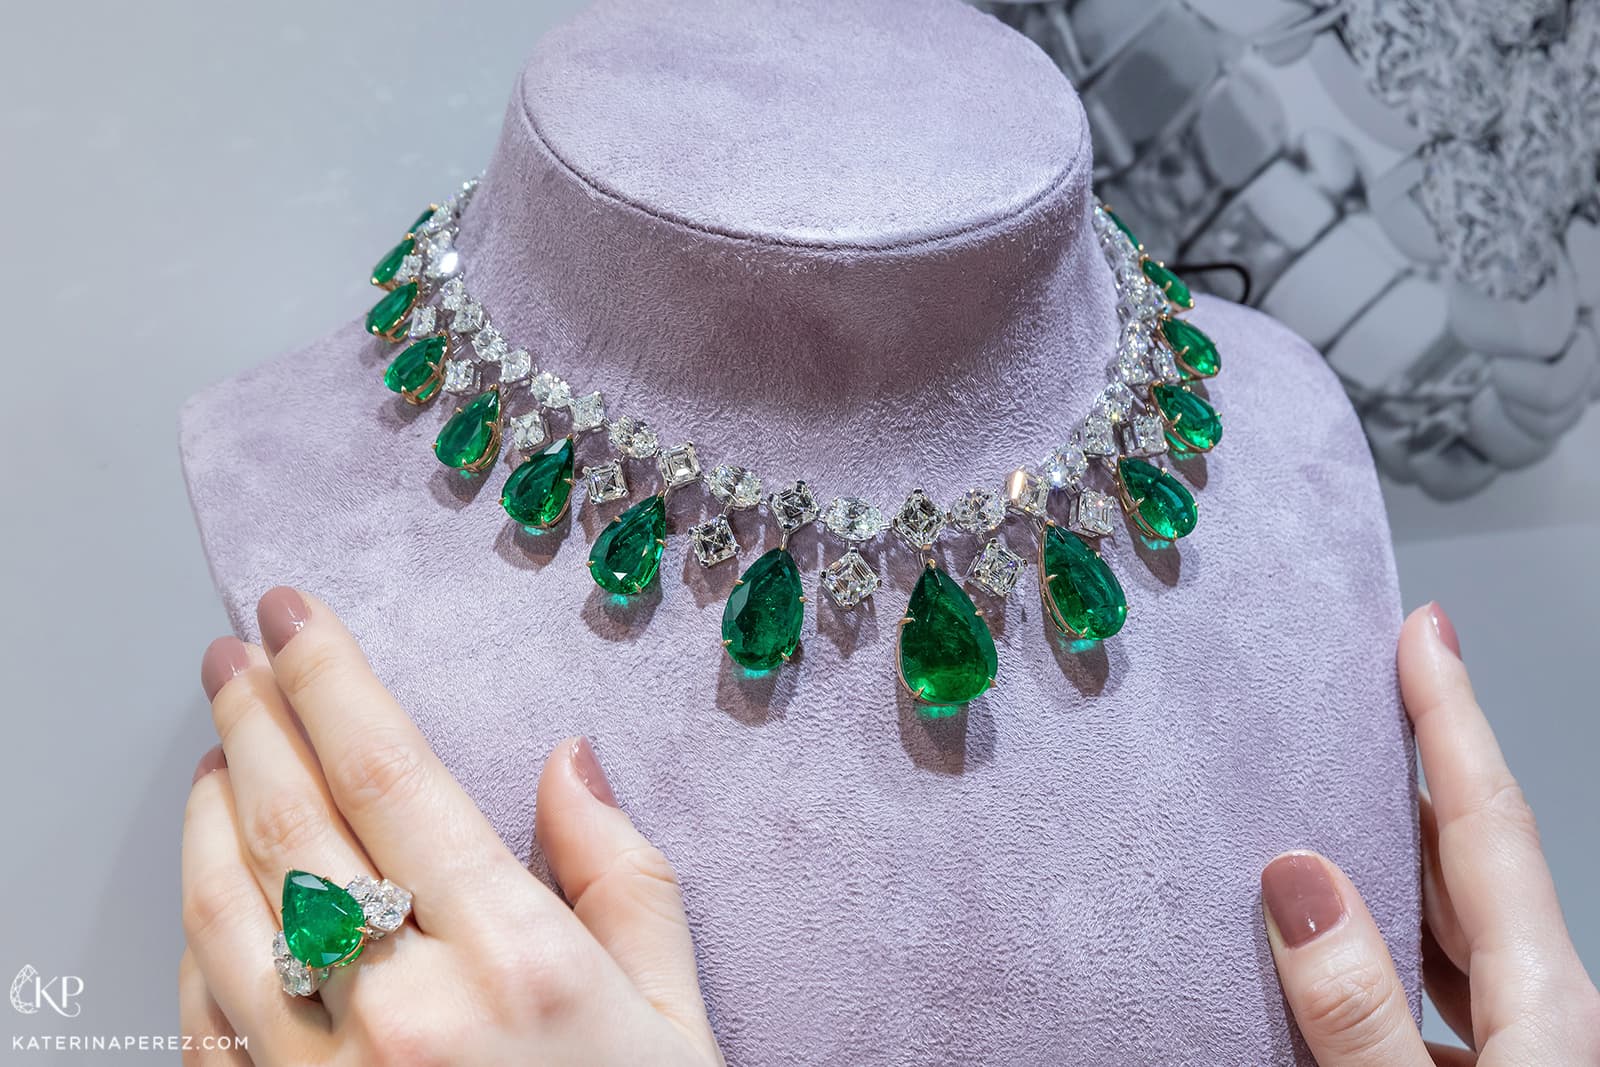 Luvor necklace with 125.70 carats of Colombian emeralds and diamonds in white gold, alongside an emerald and diamond ring